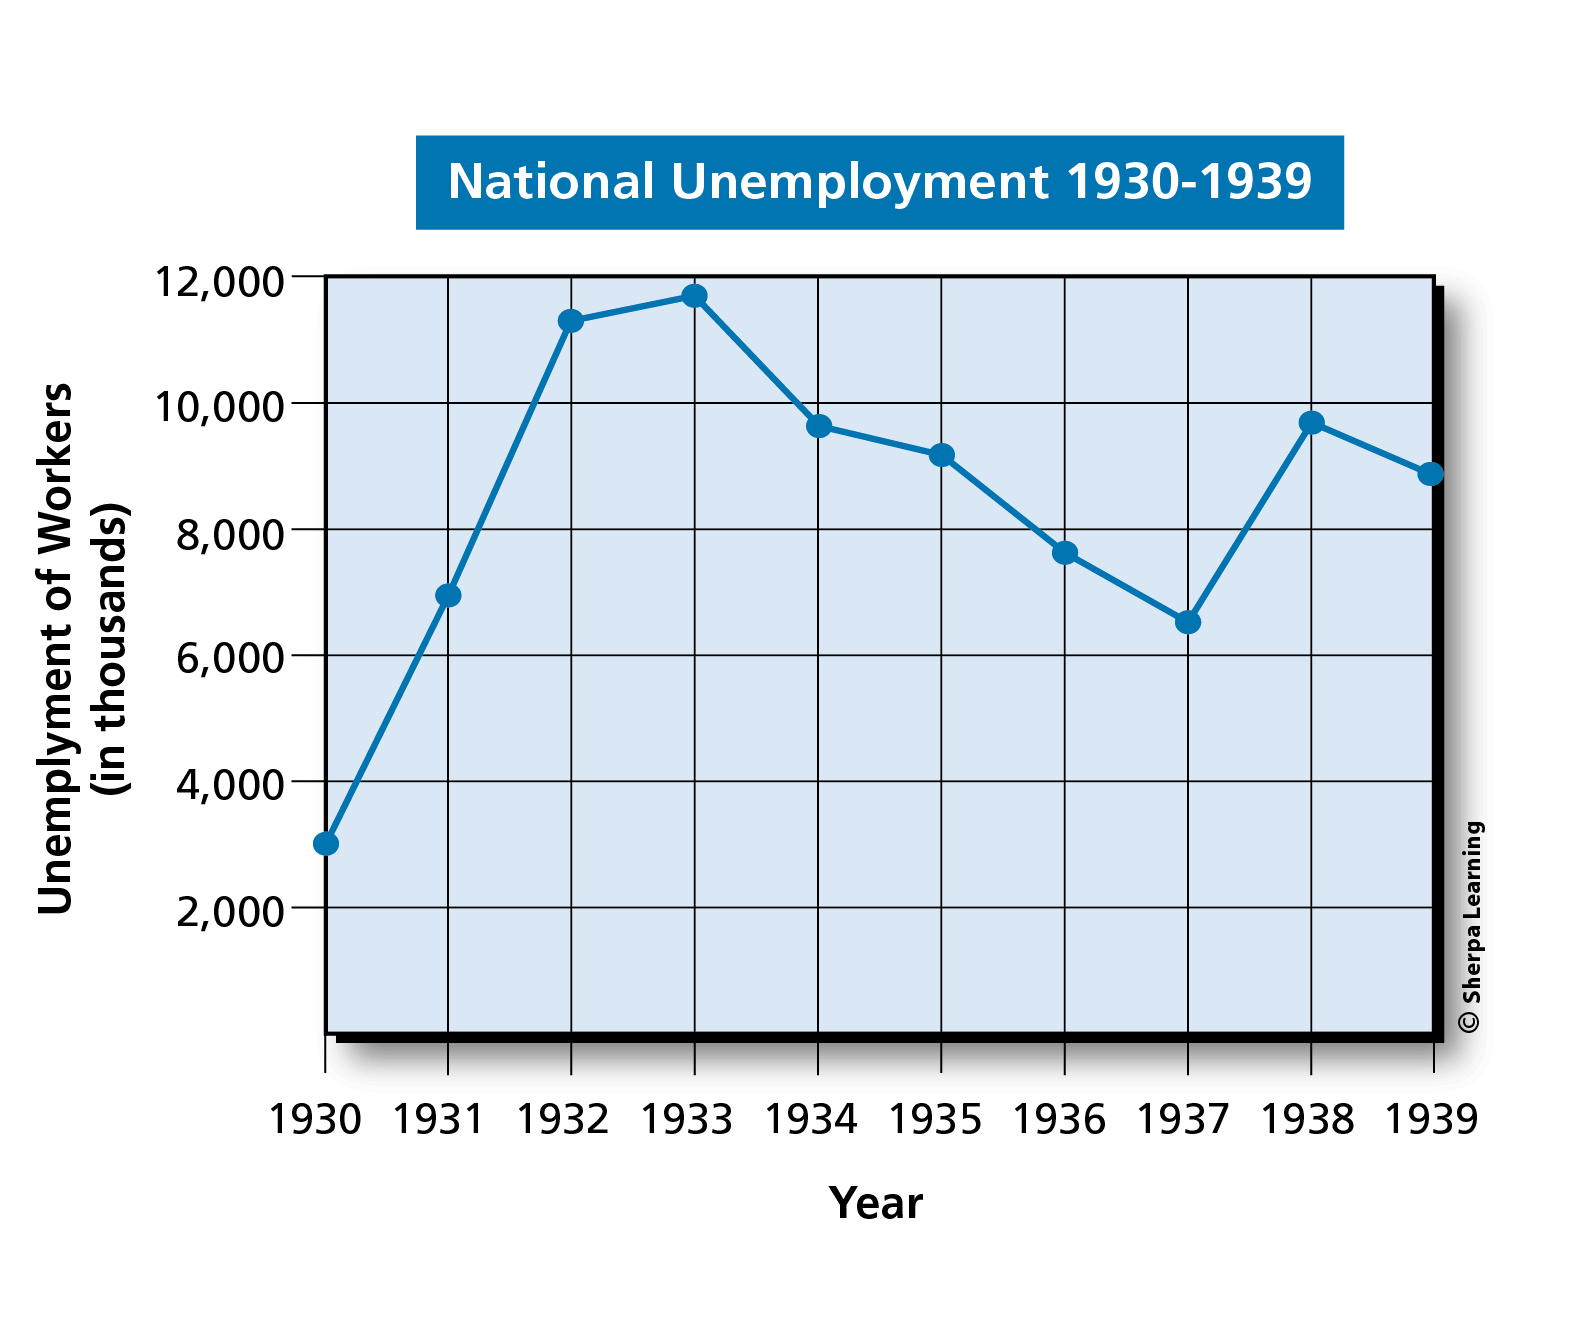 Skillbook Visual Source Exercise #13 - Graph: National Unemployment, 1930-1939